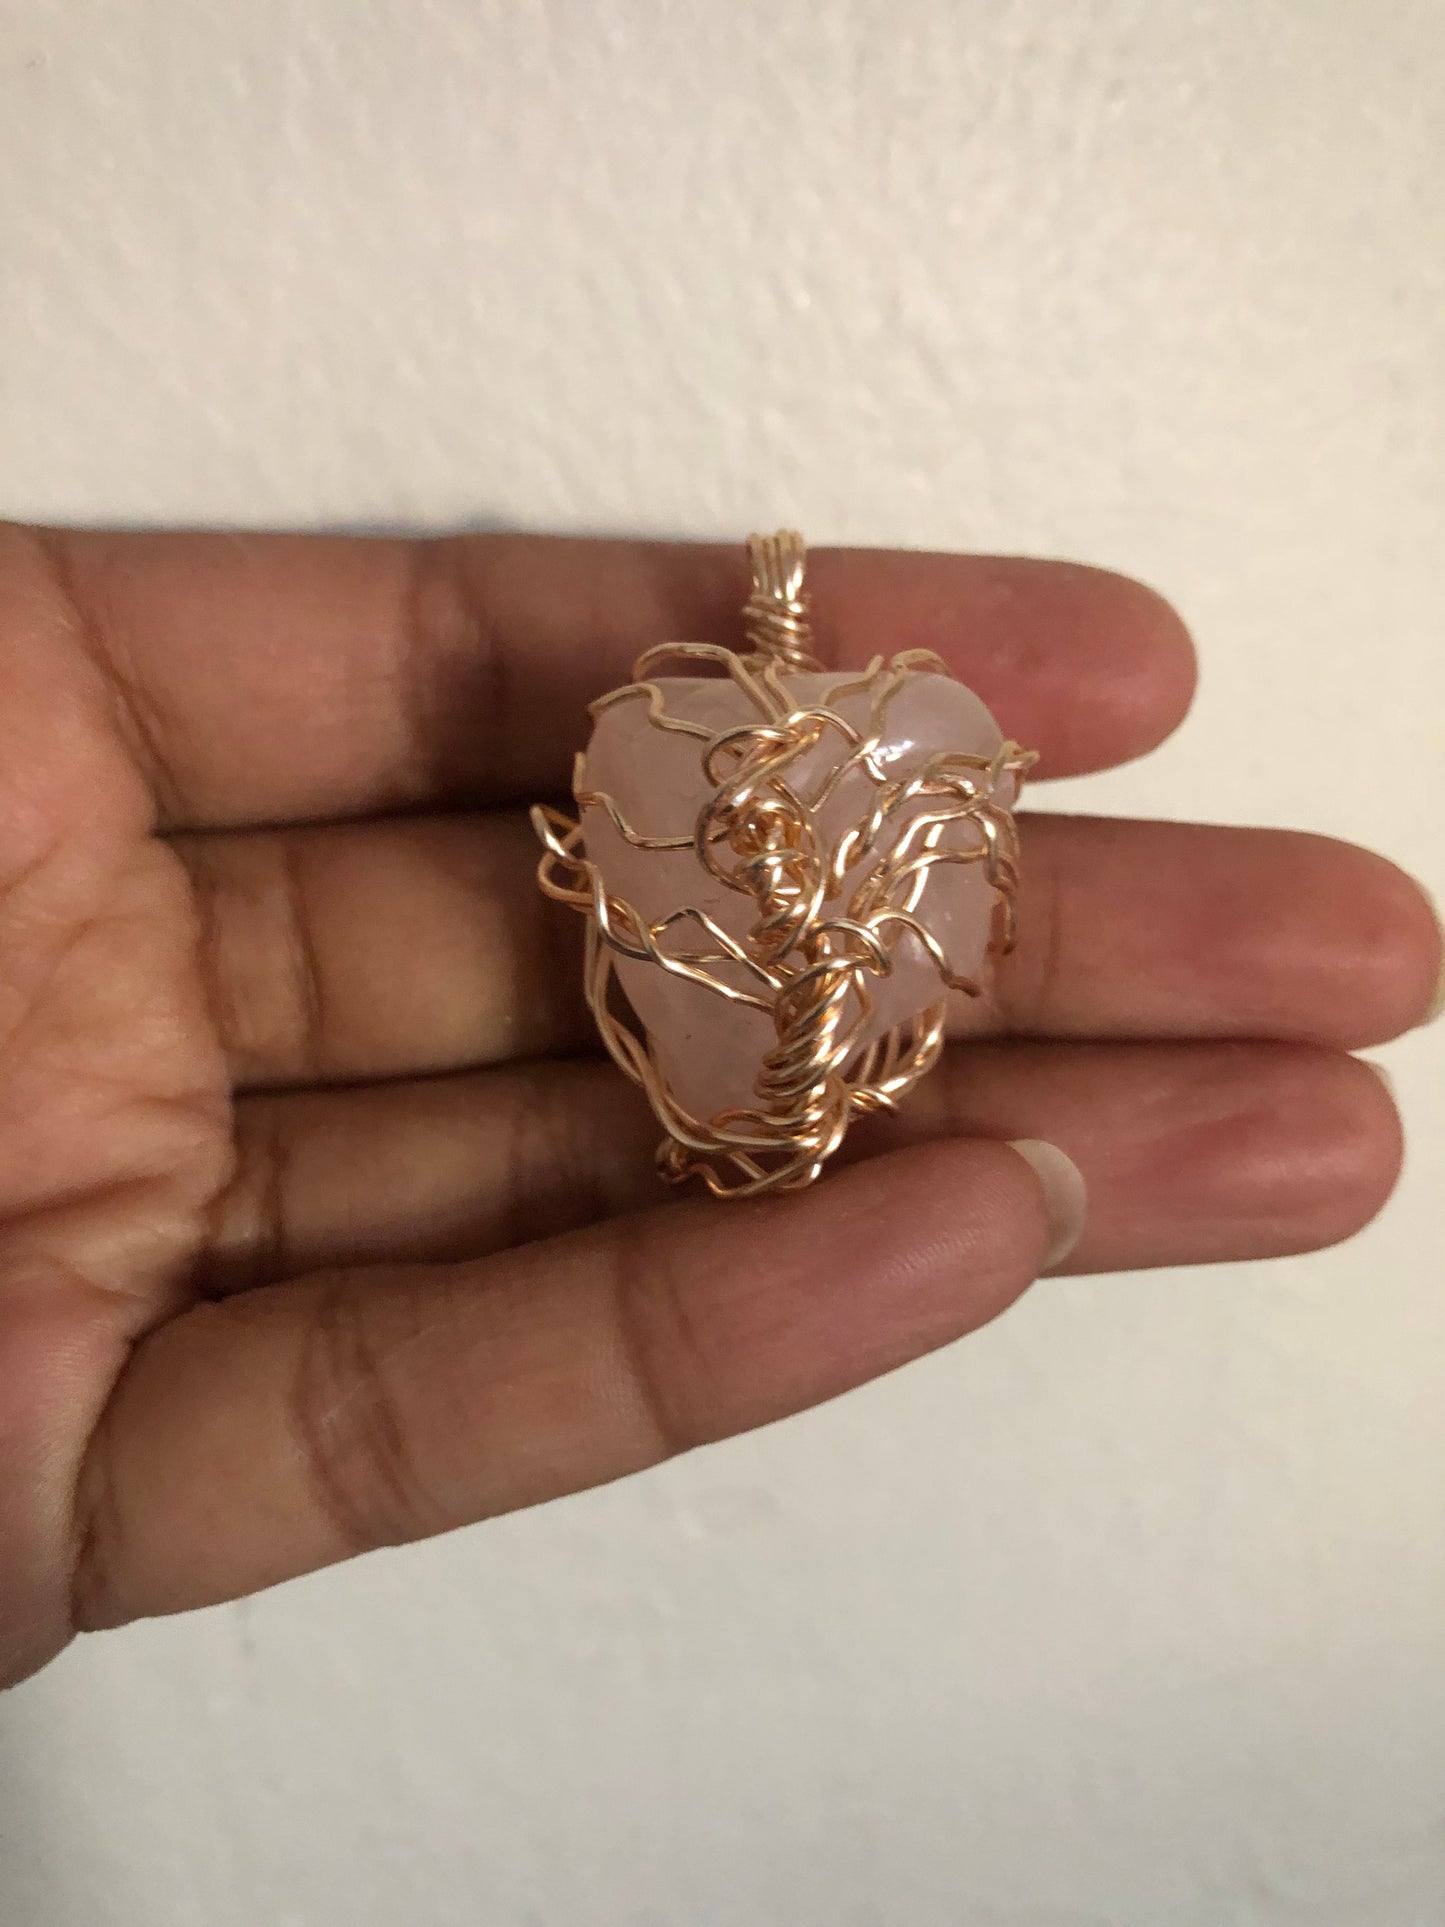 Tree of love necklace